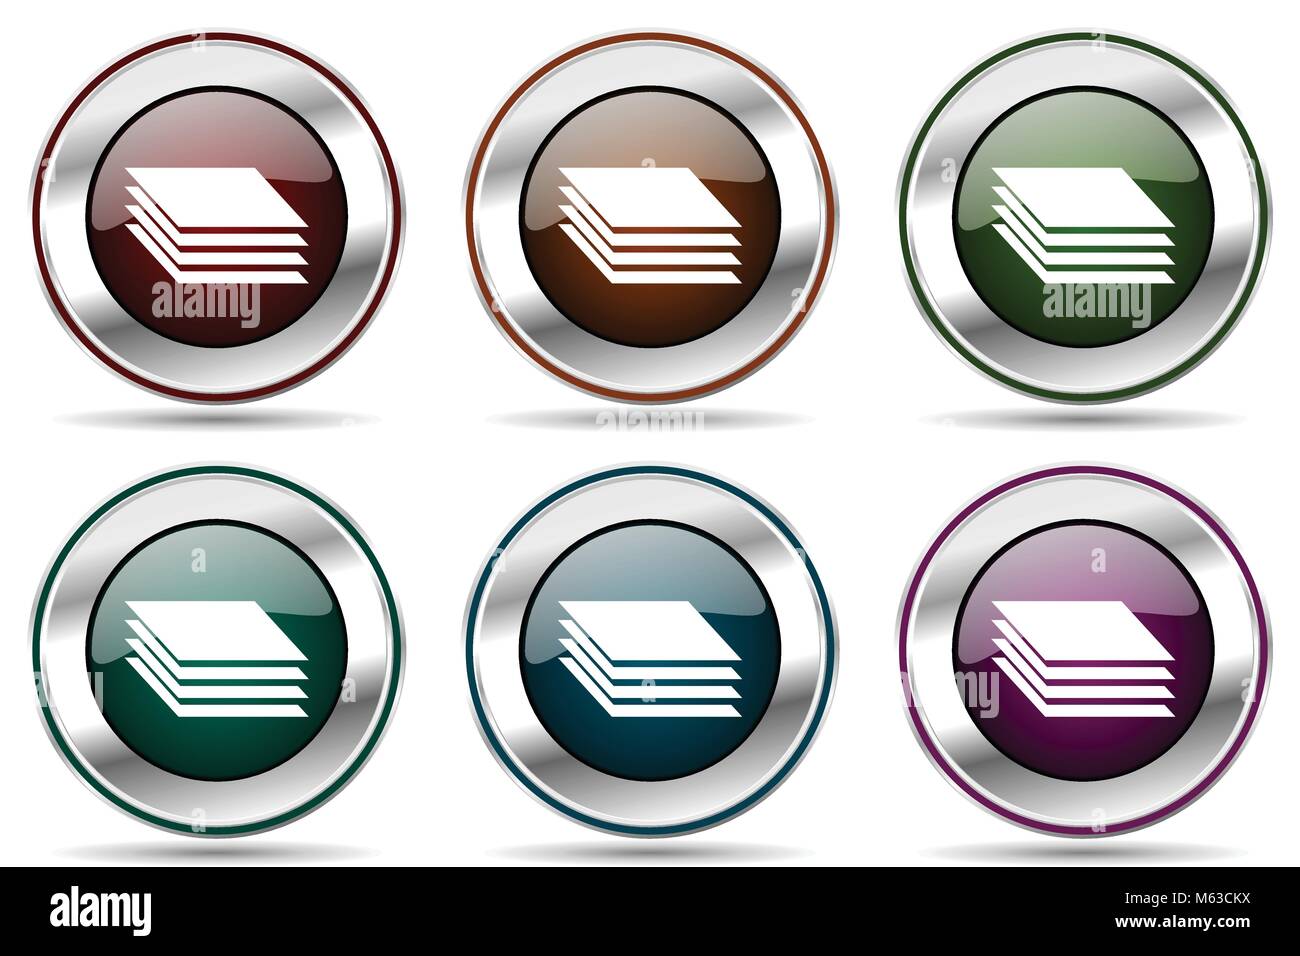 Layers vector icon set. Silver metallic chrome border icons for web design and smartphone applications Stock Vector